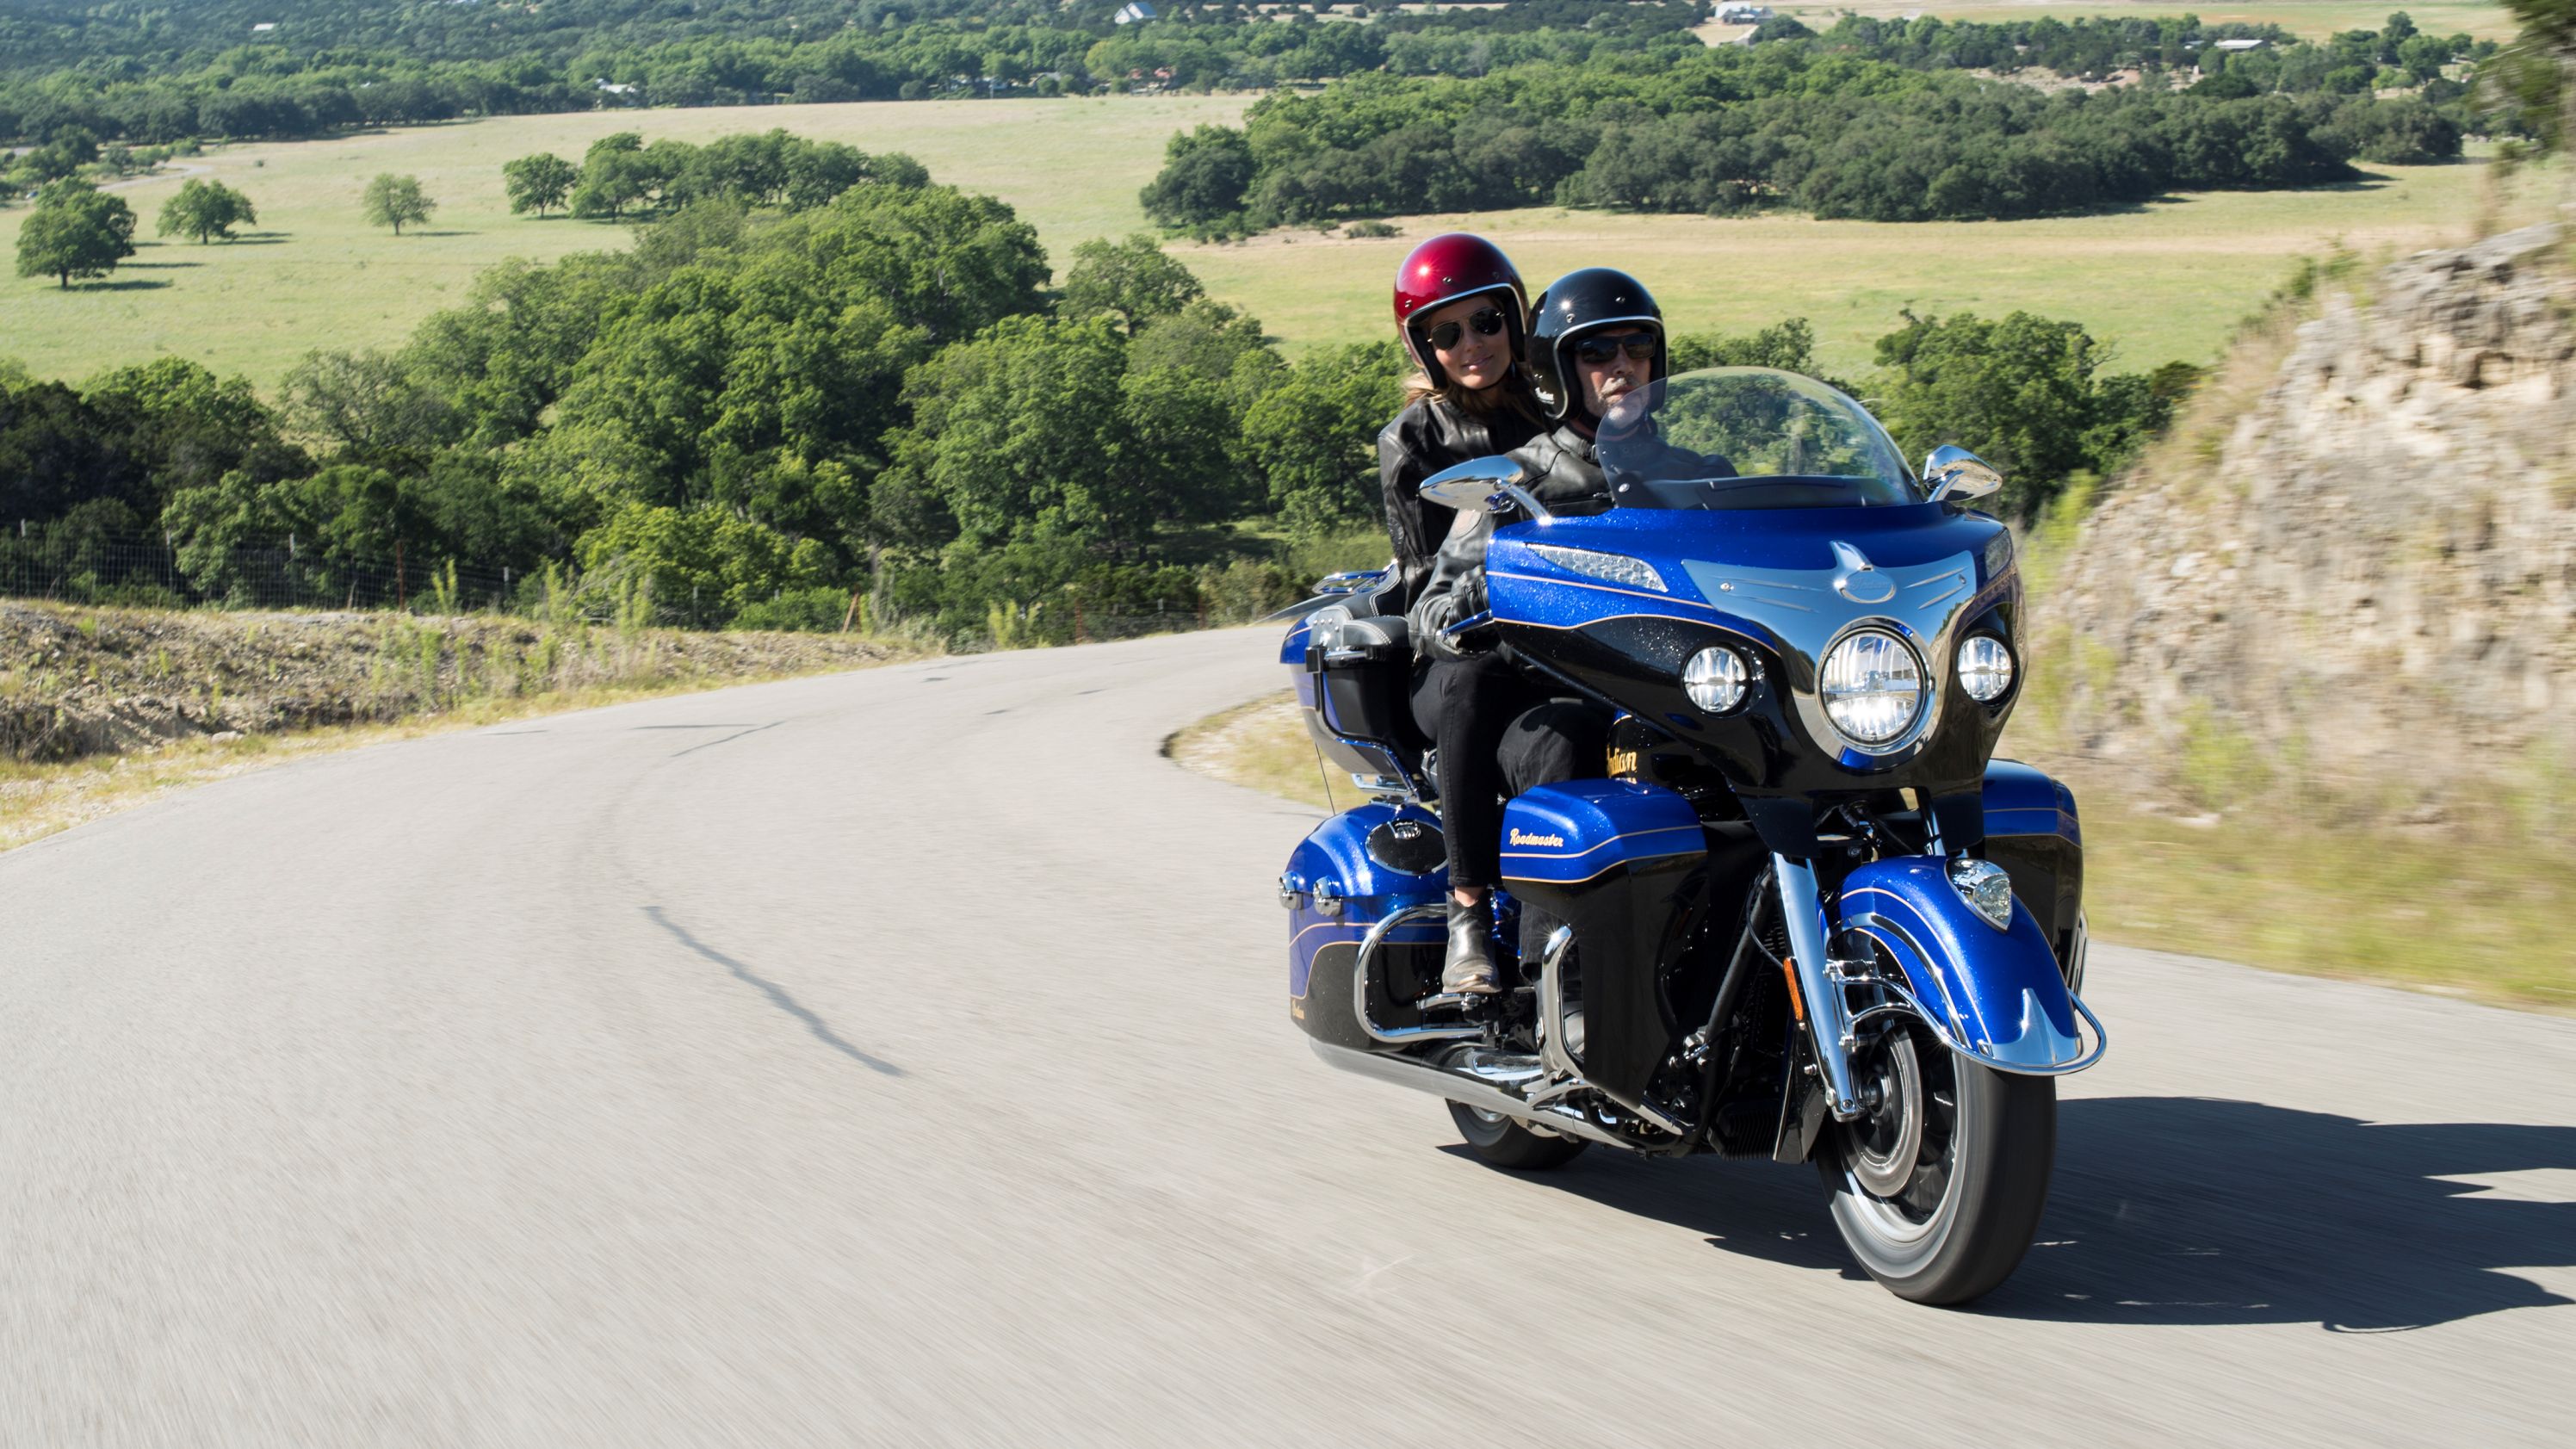 2018 Indian Motorcycle Roadmaster Elite - How Does It Stack Up To The Competition?